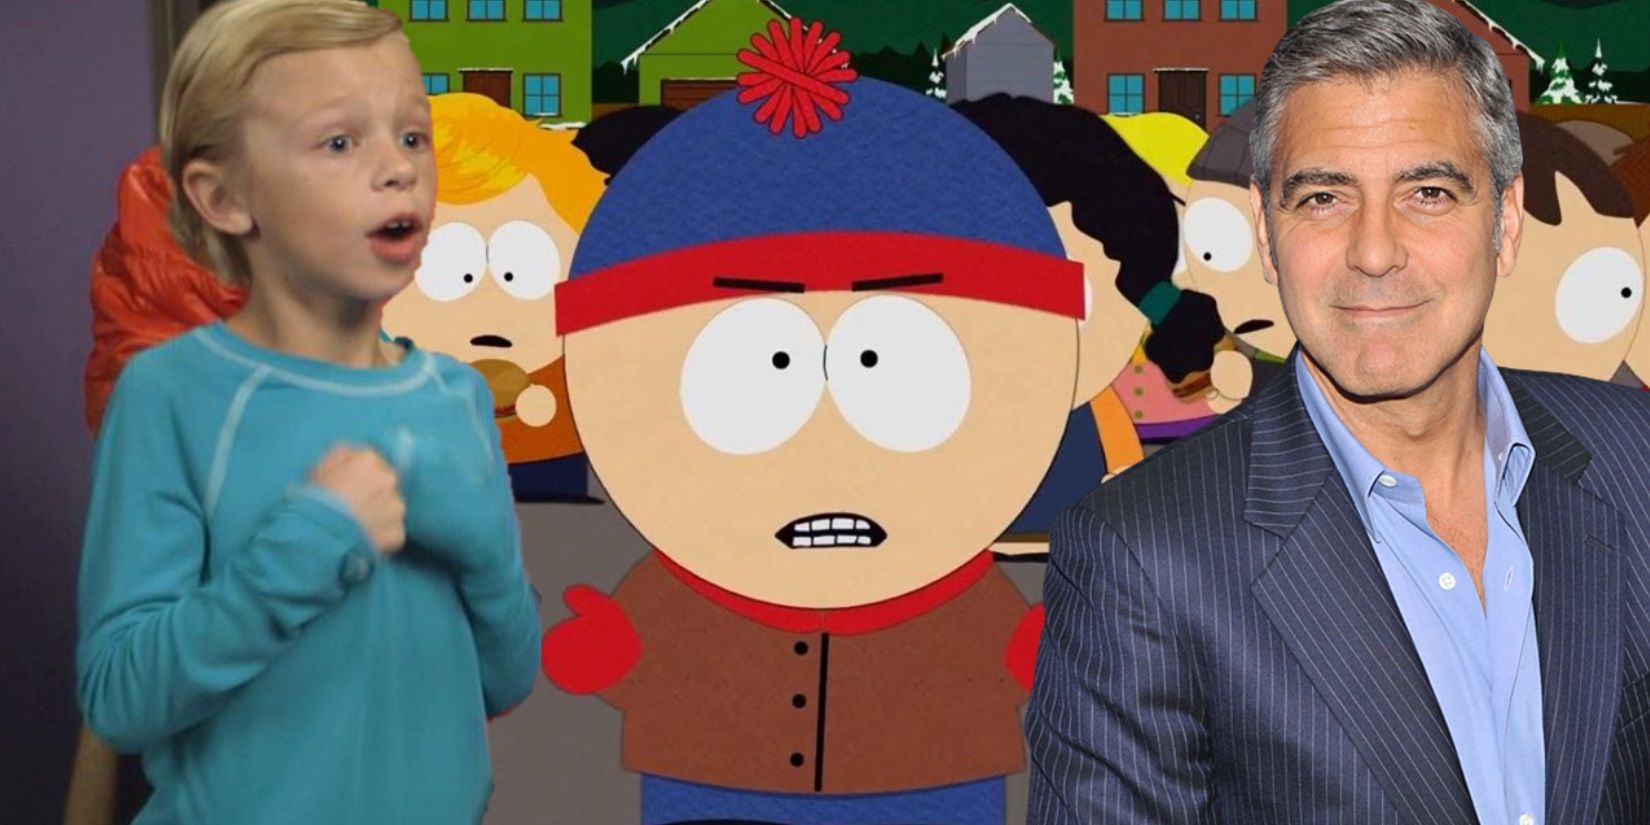 Collage of live-action Butters, Stan Marsh in South Park, and George Clooney